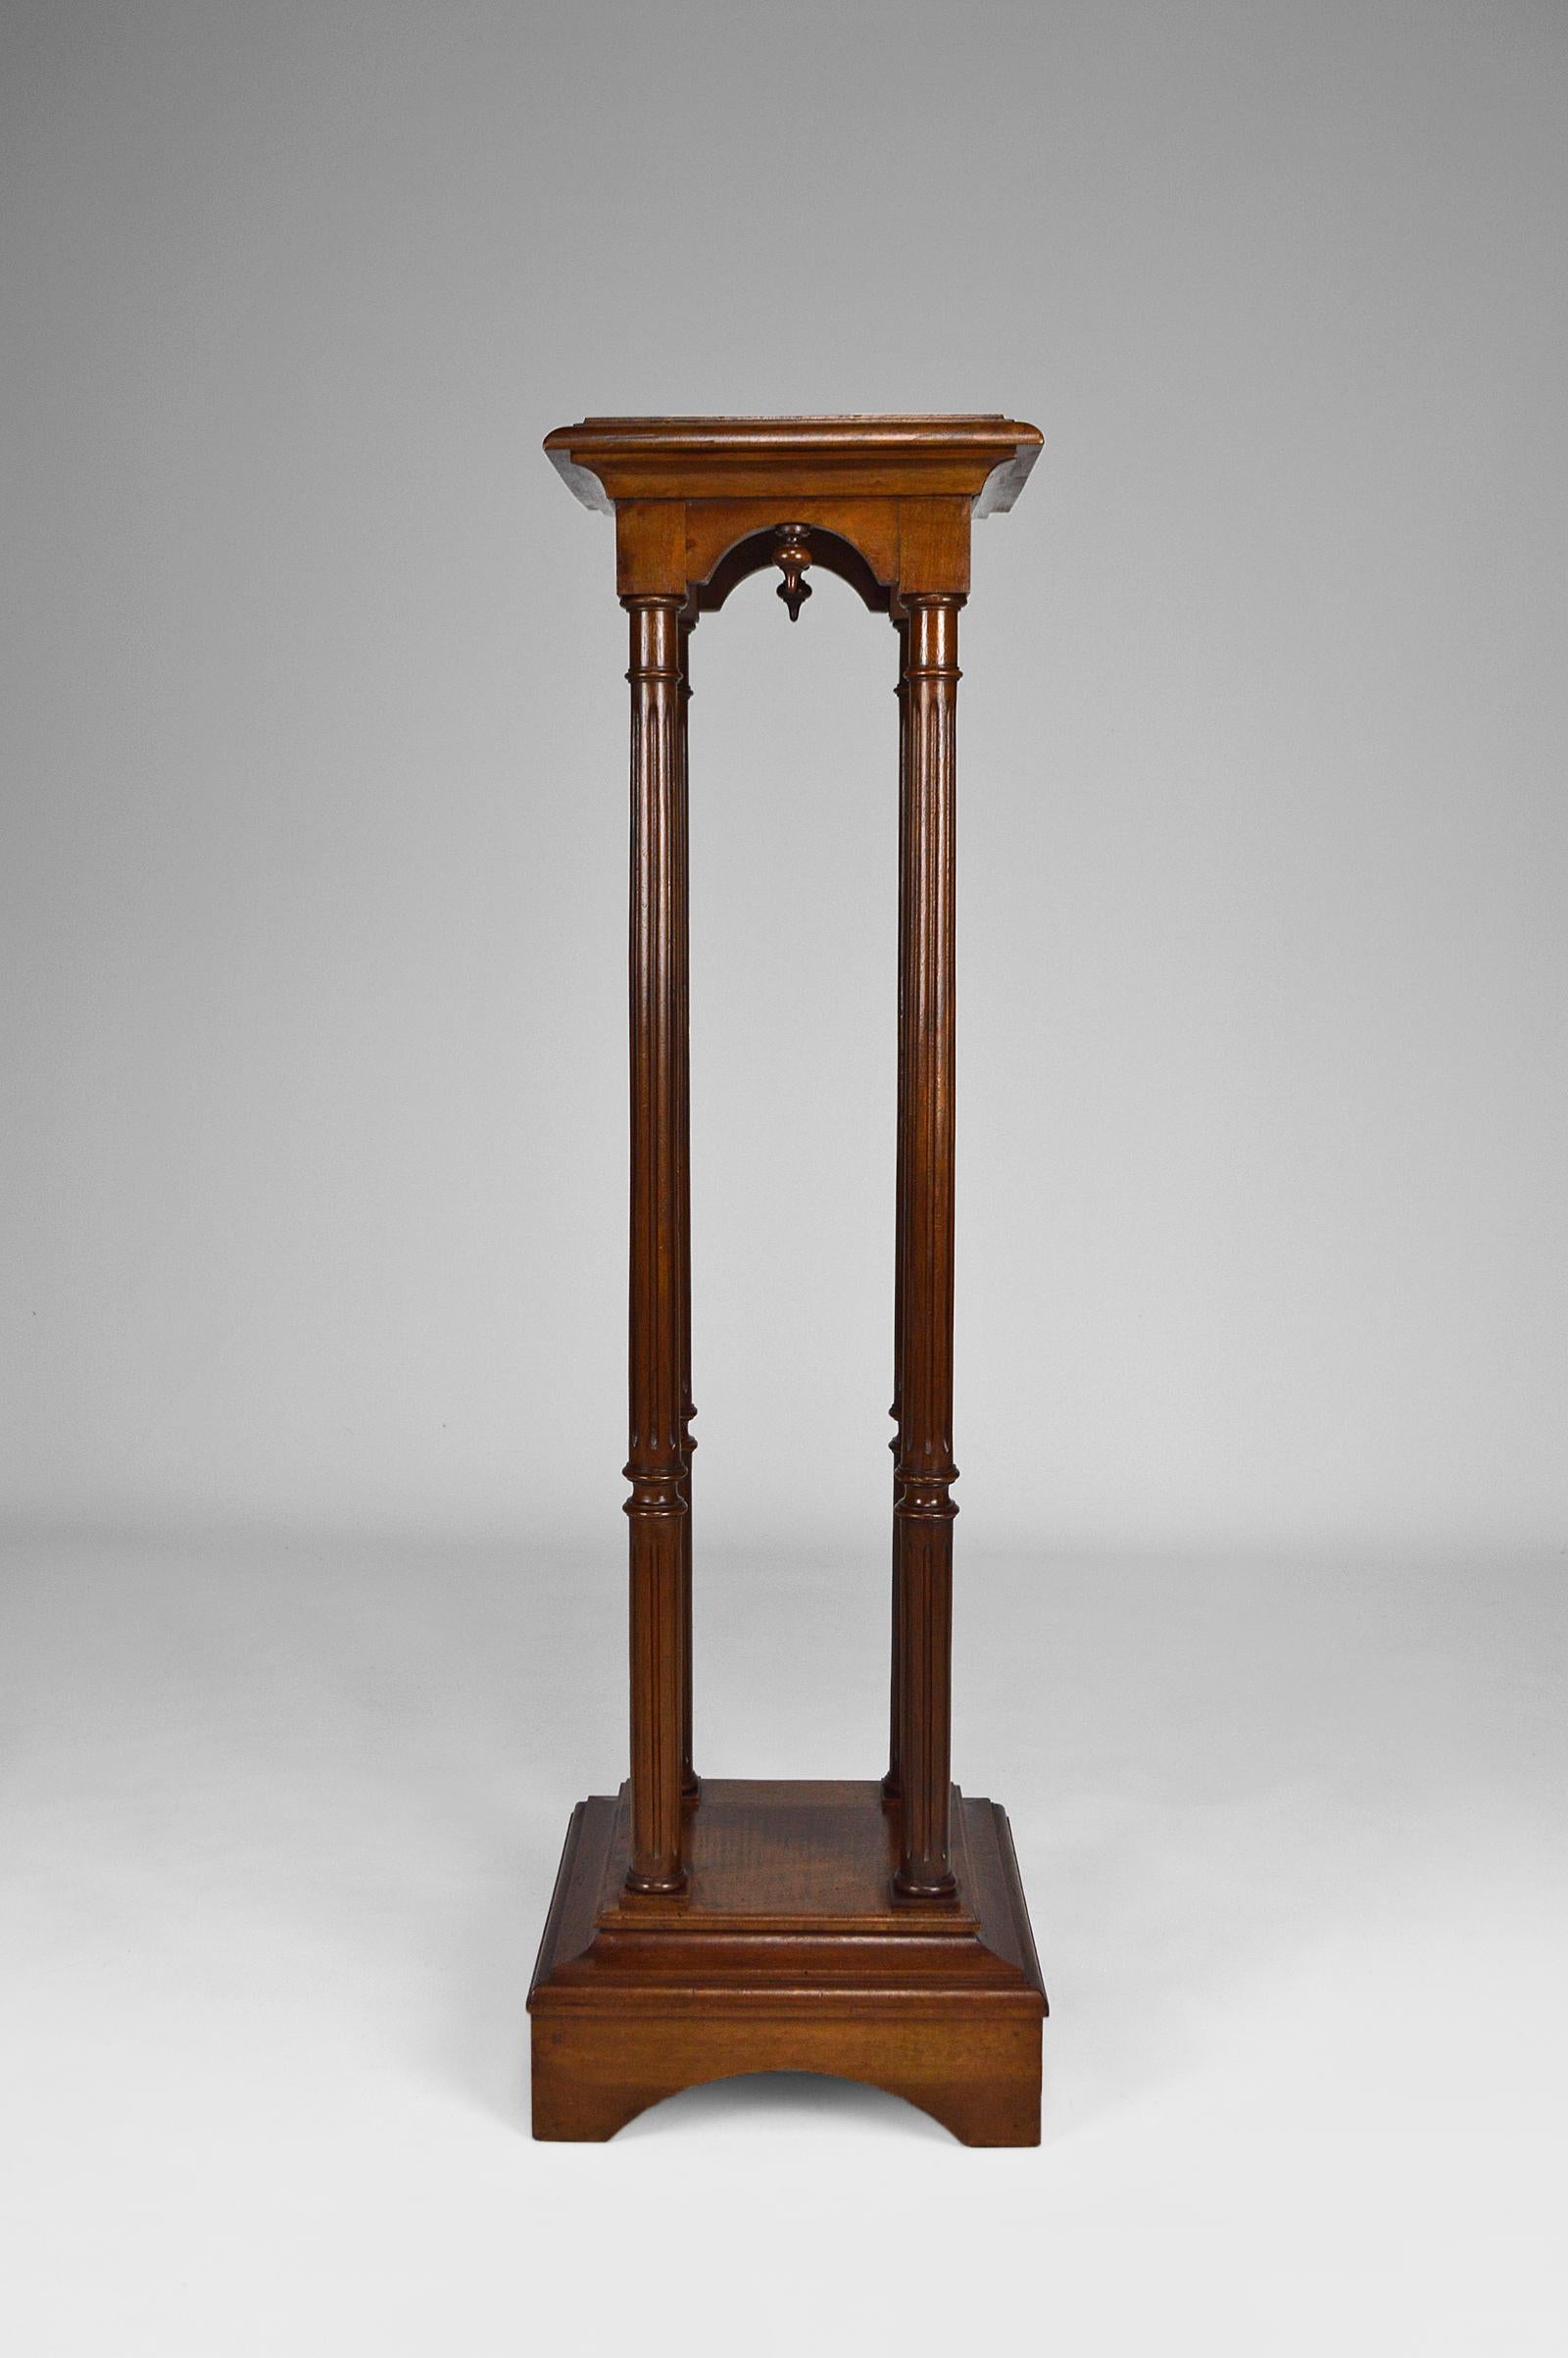 Elegant high pedestal / gueridon / side table in carved solid walnut with 4 columns.

Neo-Gothic / Gothic Revival / Victorian style, France, late 19th century, circa 1880. 

In very good condition: wood cleaned, treated against xylophages, new